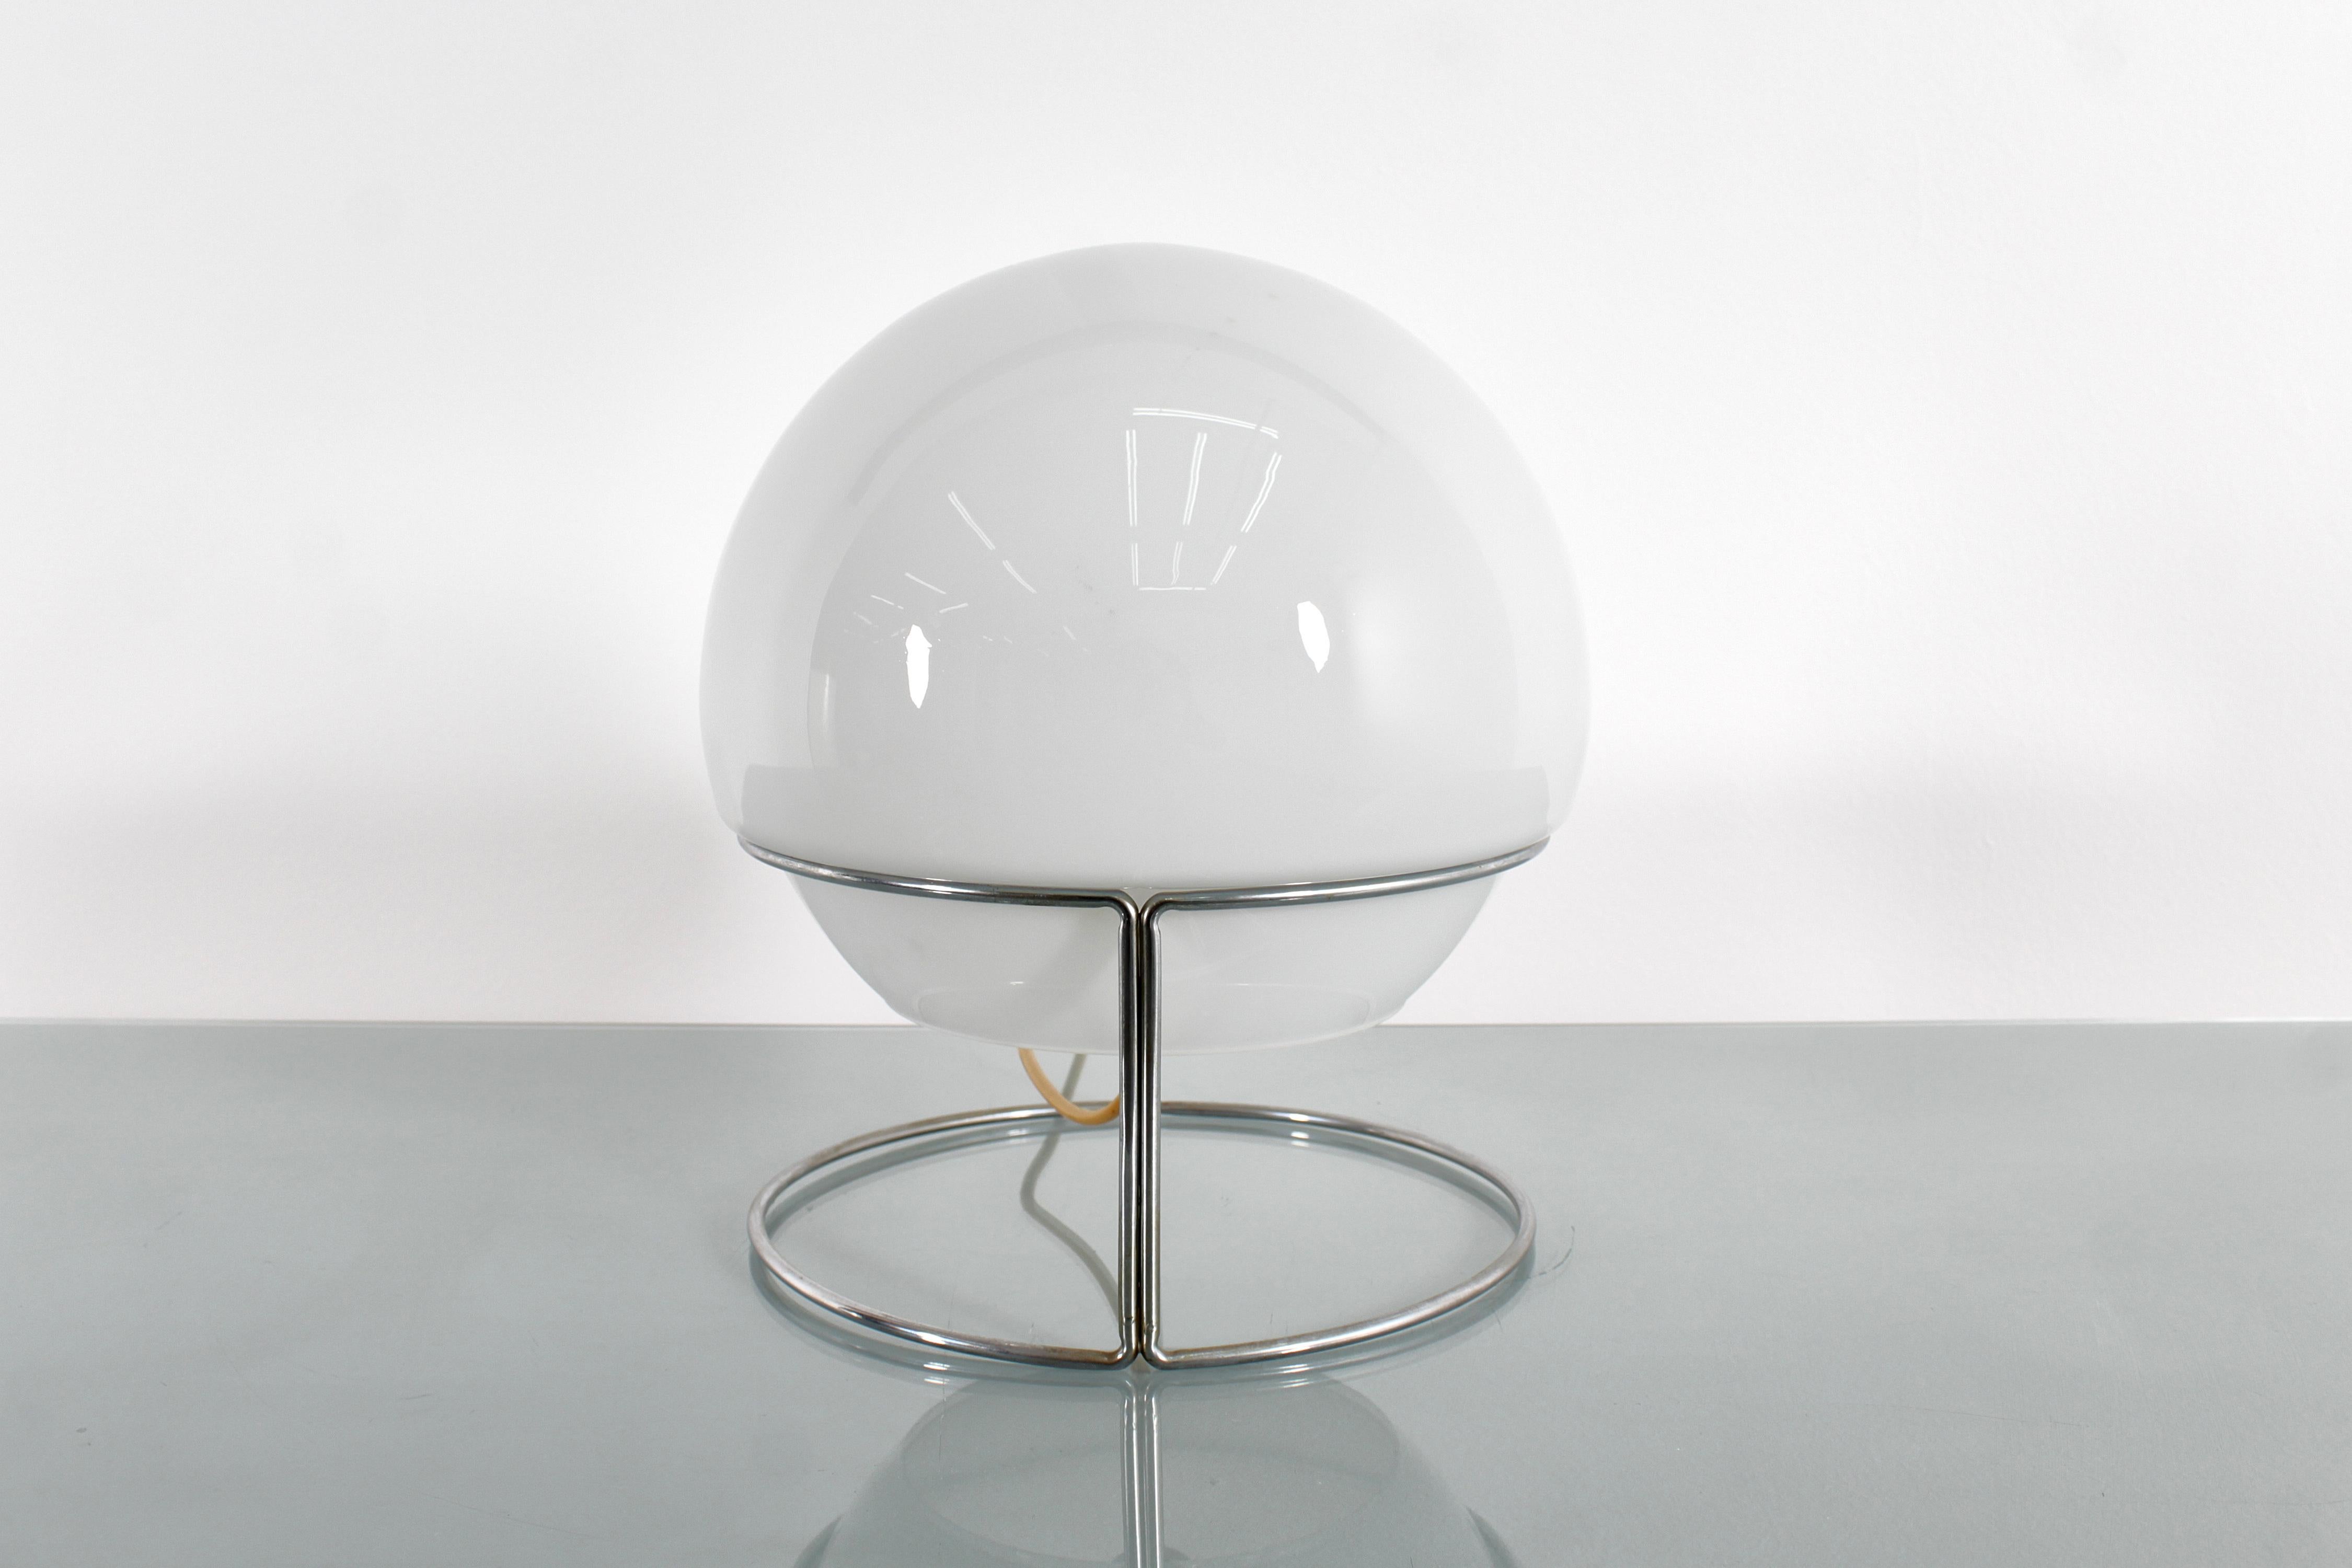 Italian Mid-Century Space Age C. Nason Style Steel and Milky Glass Table Lamp 70s Italy For Sale